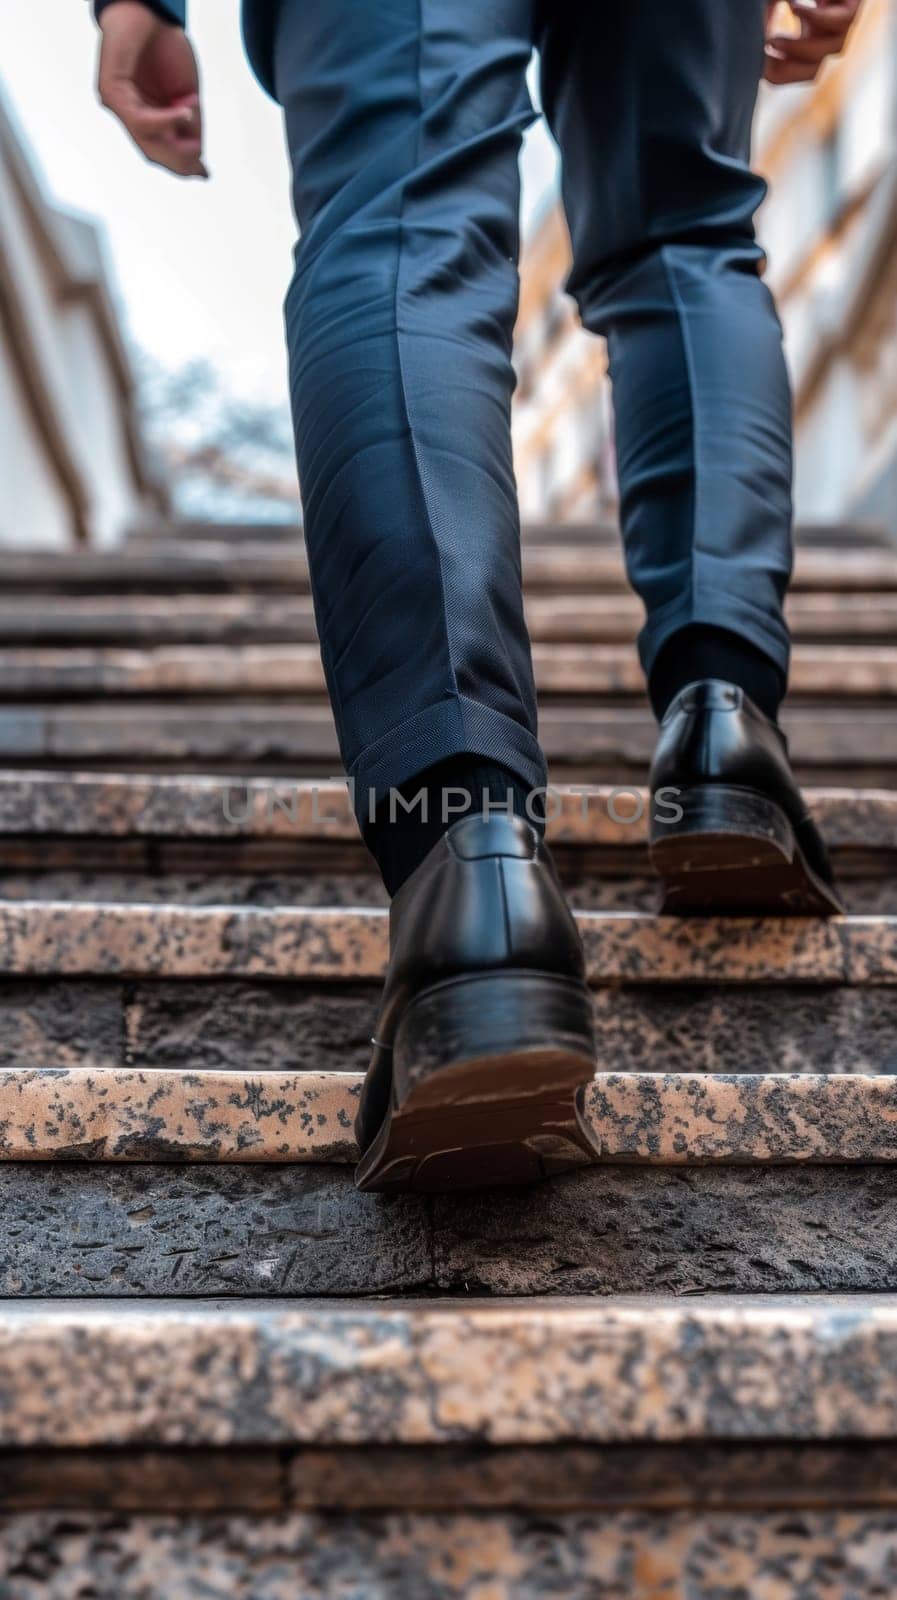 Dynamic perspective of a man in formal attire walking up textured stairs, emphasizing motion and the pace of urban life. by sfinks